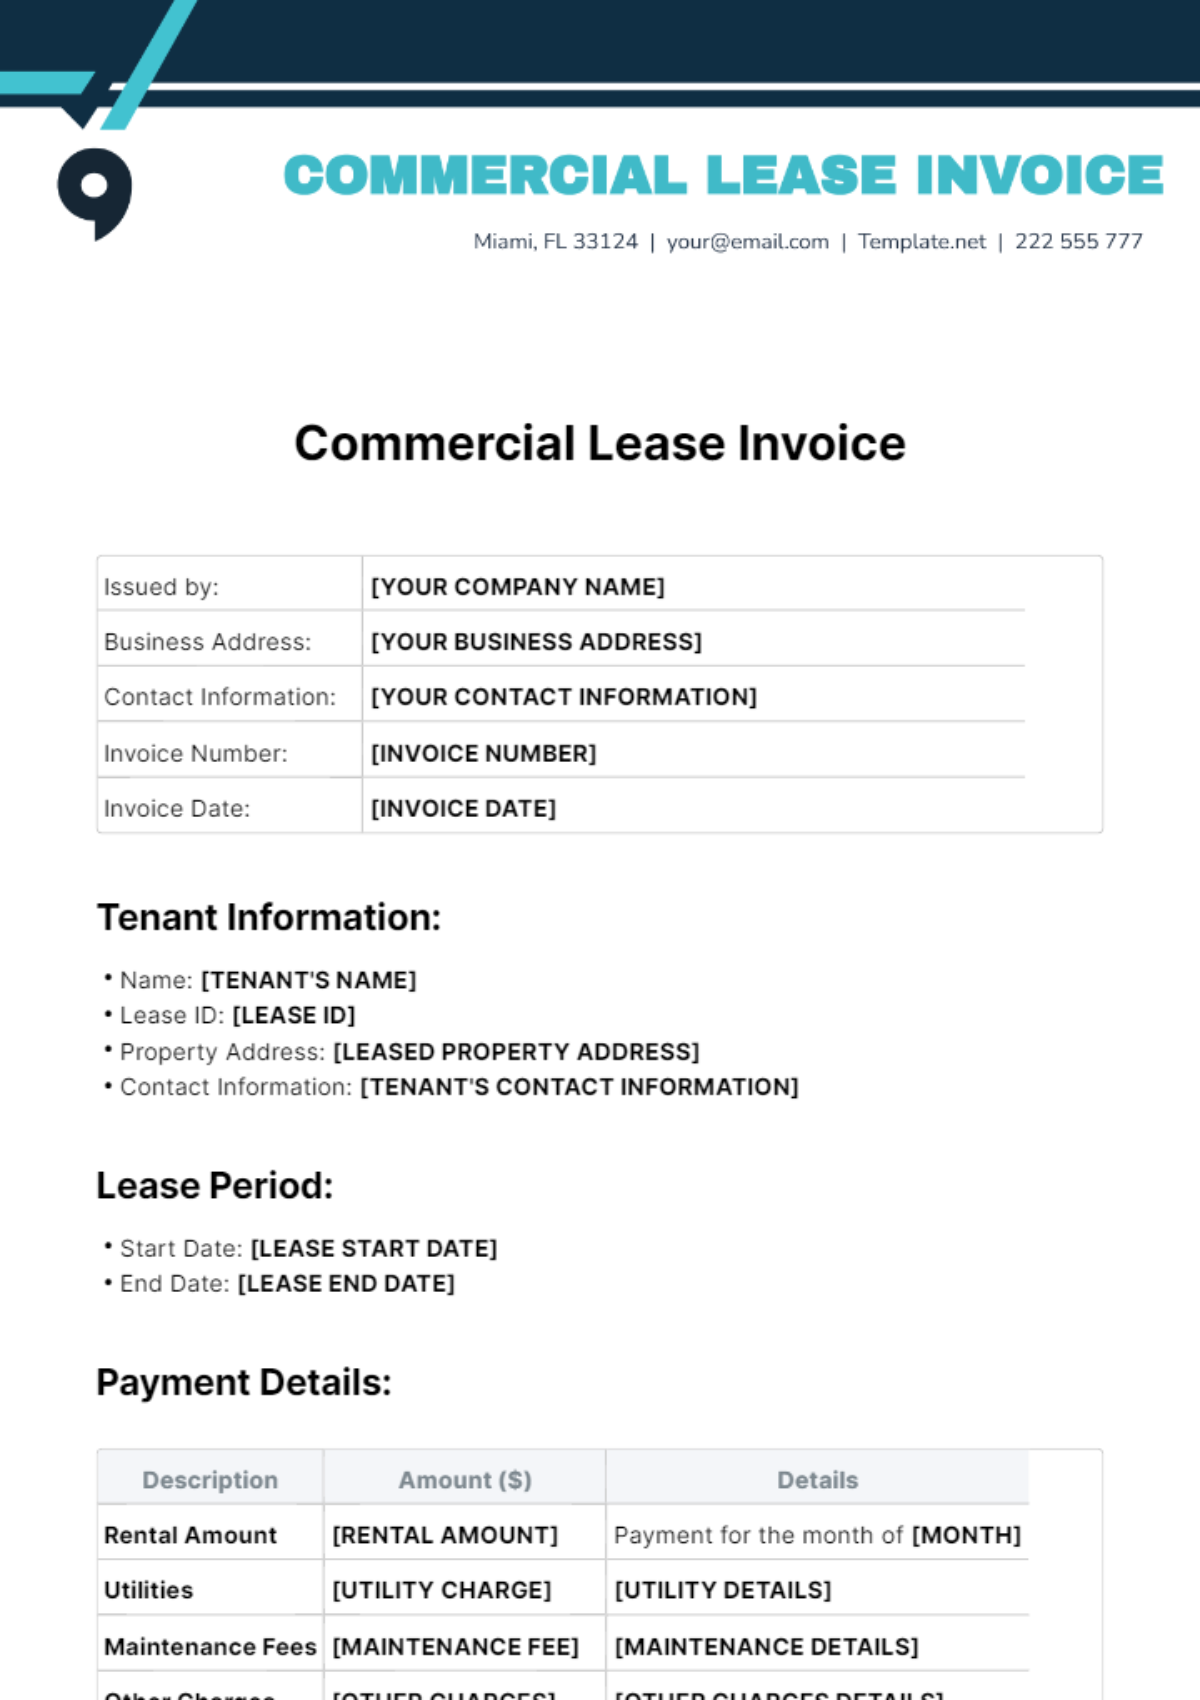 Free Commercial Lease Invoice Template